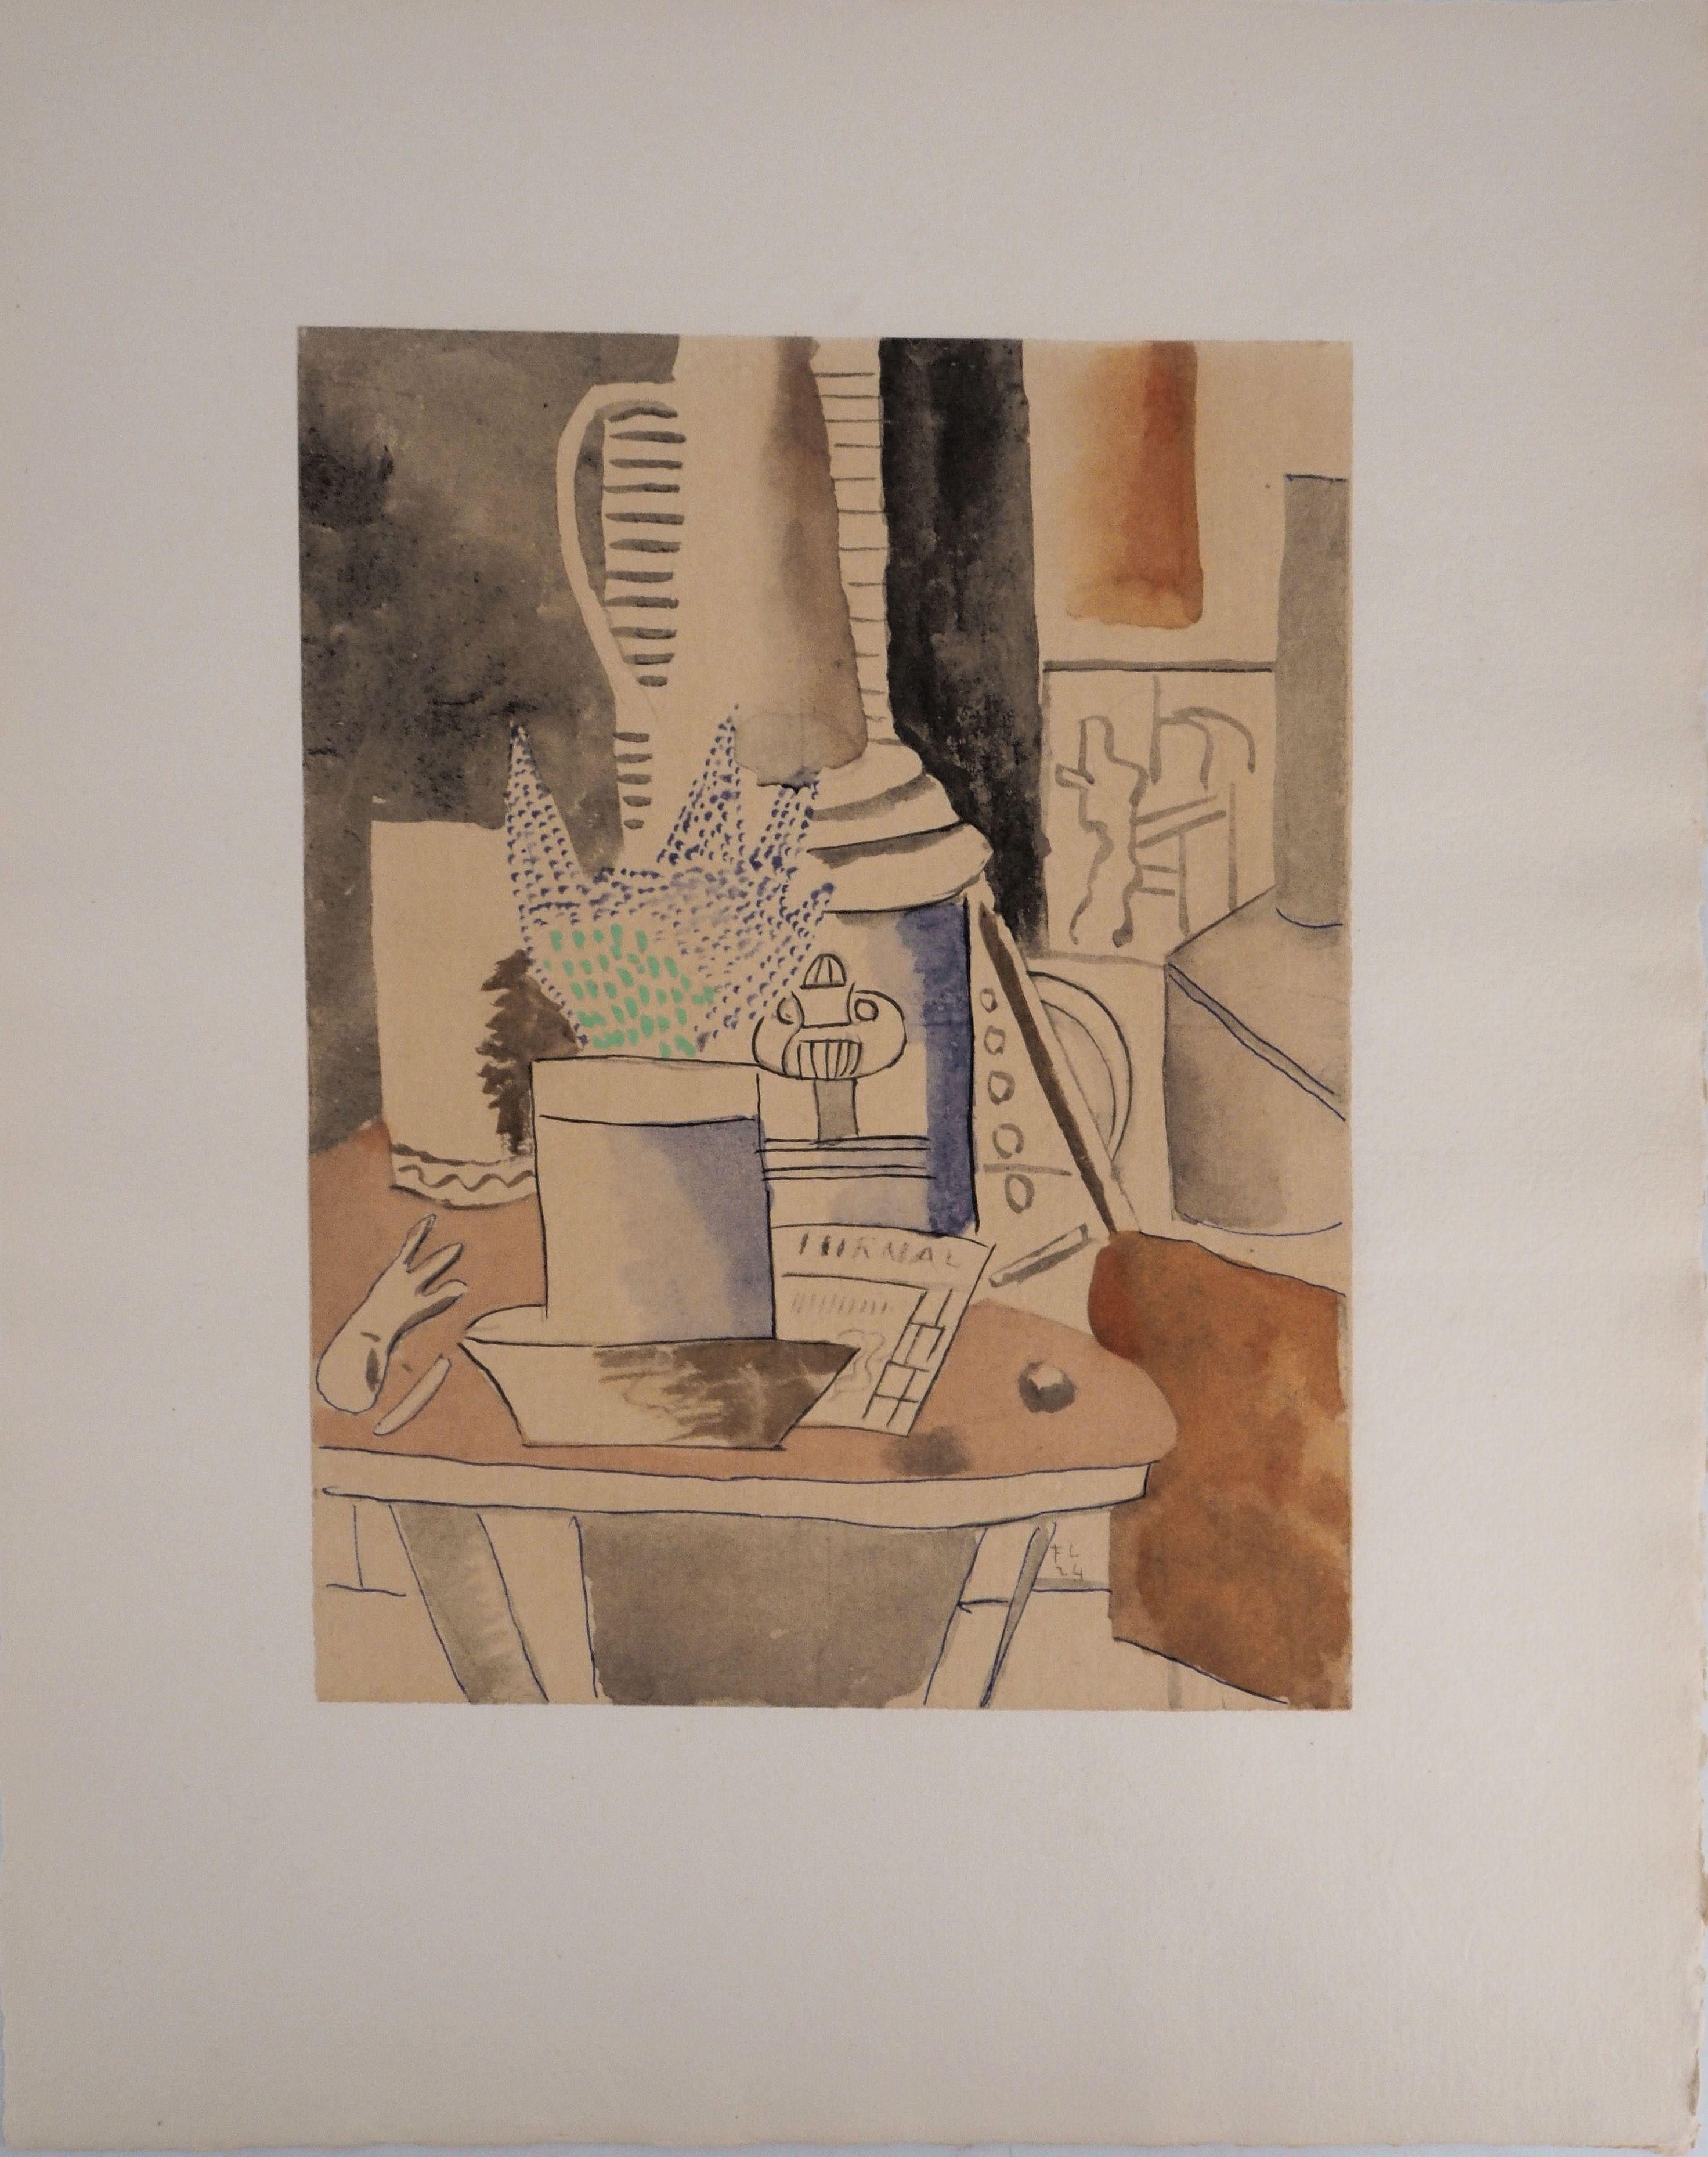 Fernand Léger Figurative Print - Still life with Journal and Flowers - Lithograph and Stencil, 1959